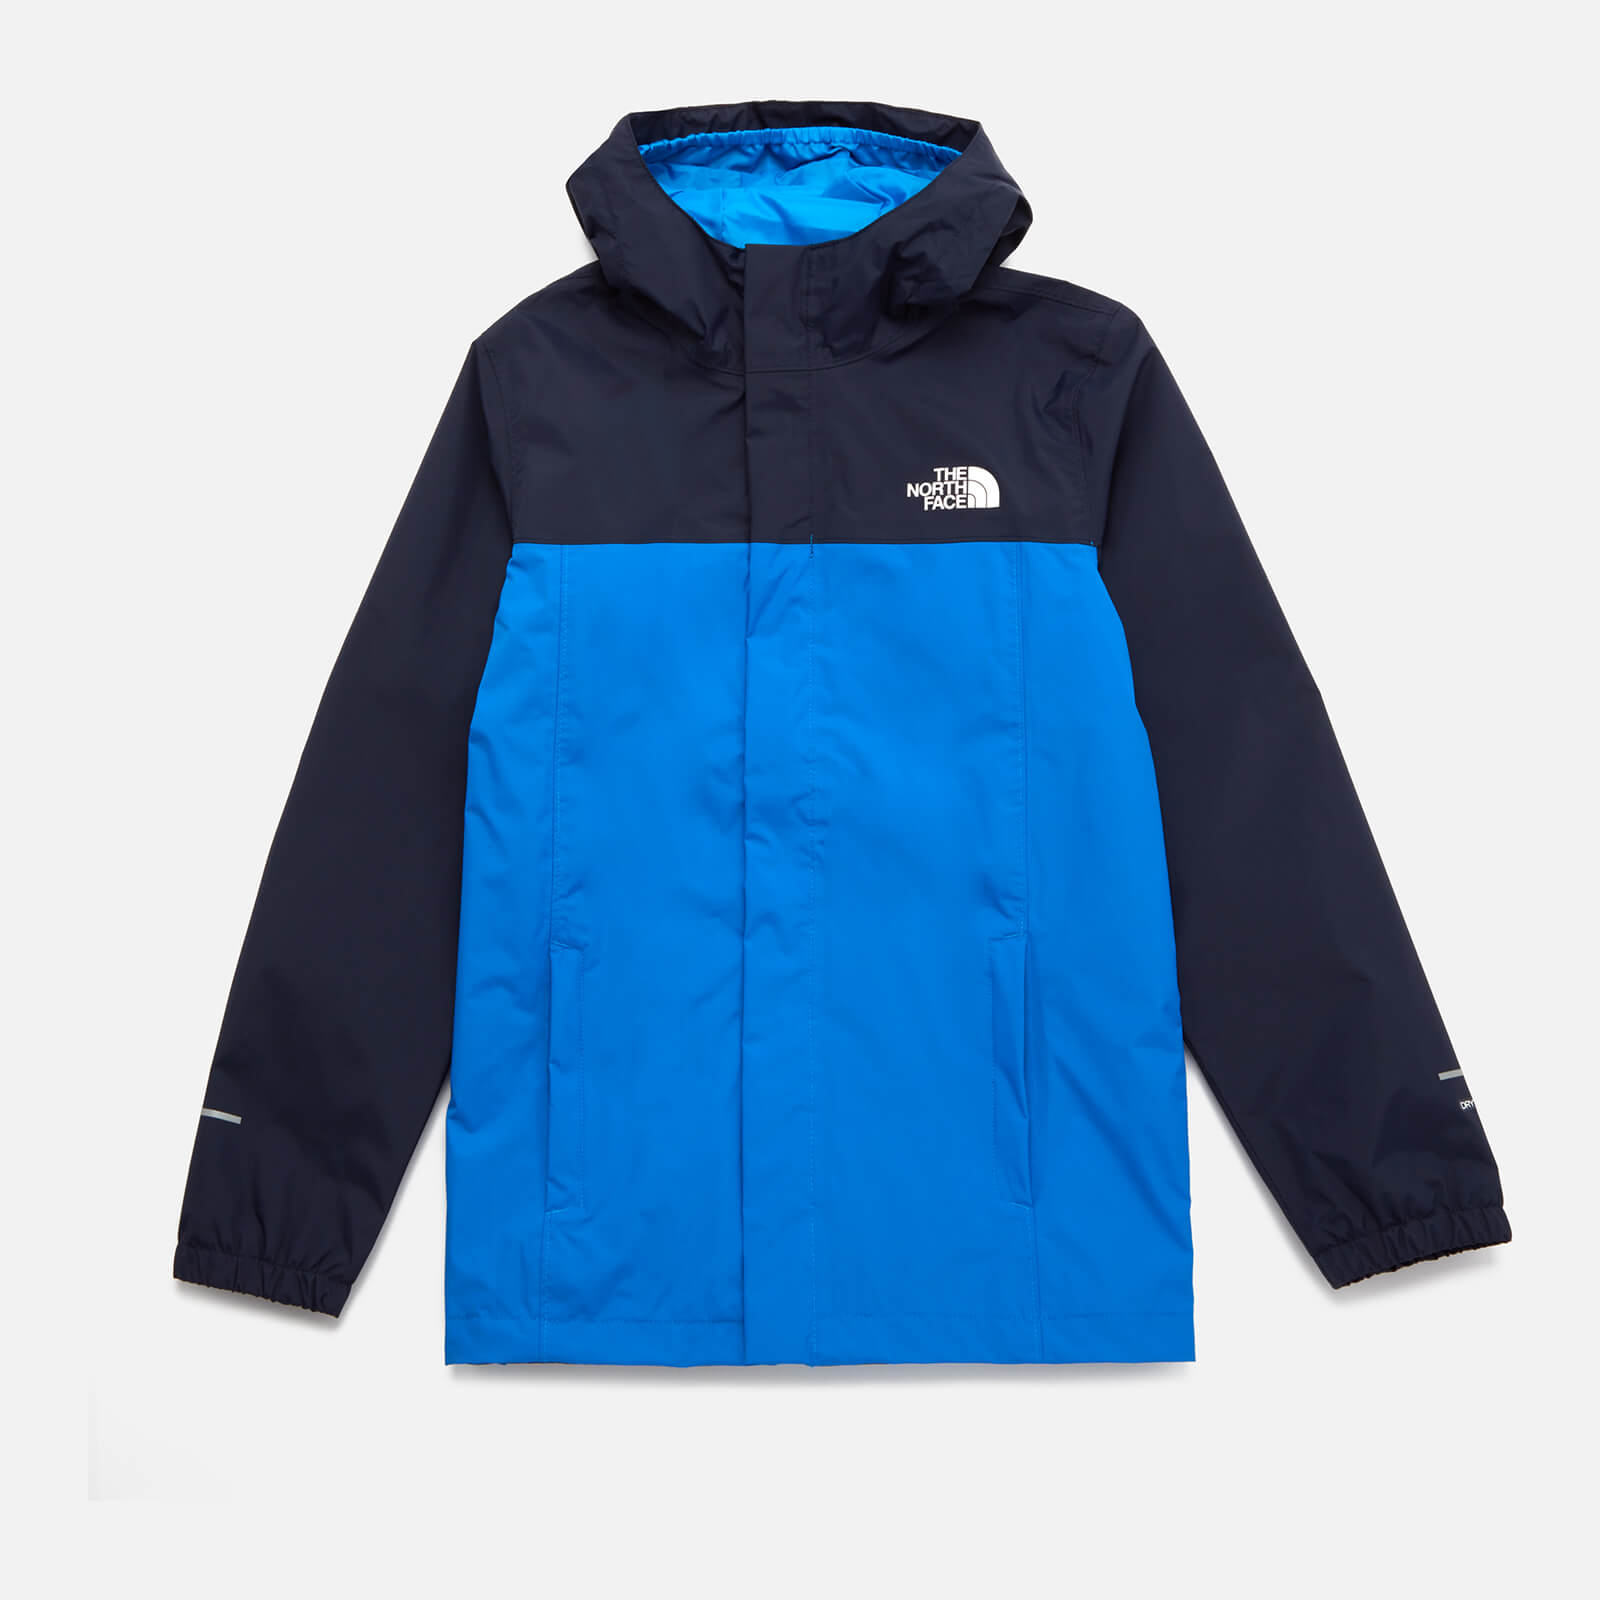 The North Face Boys' Resolve Reflective Jacket - Black/Blue - 12 - 14 Years